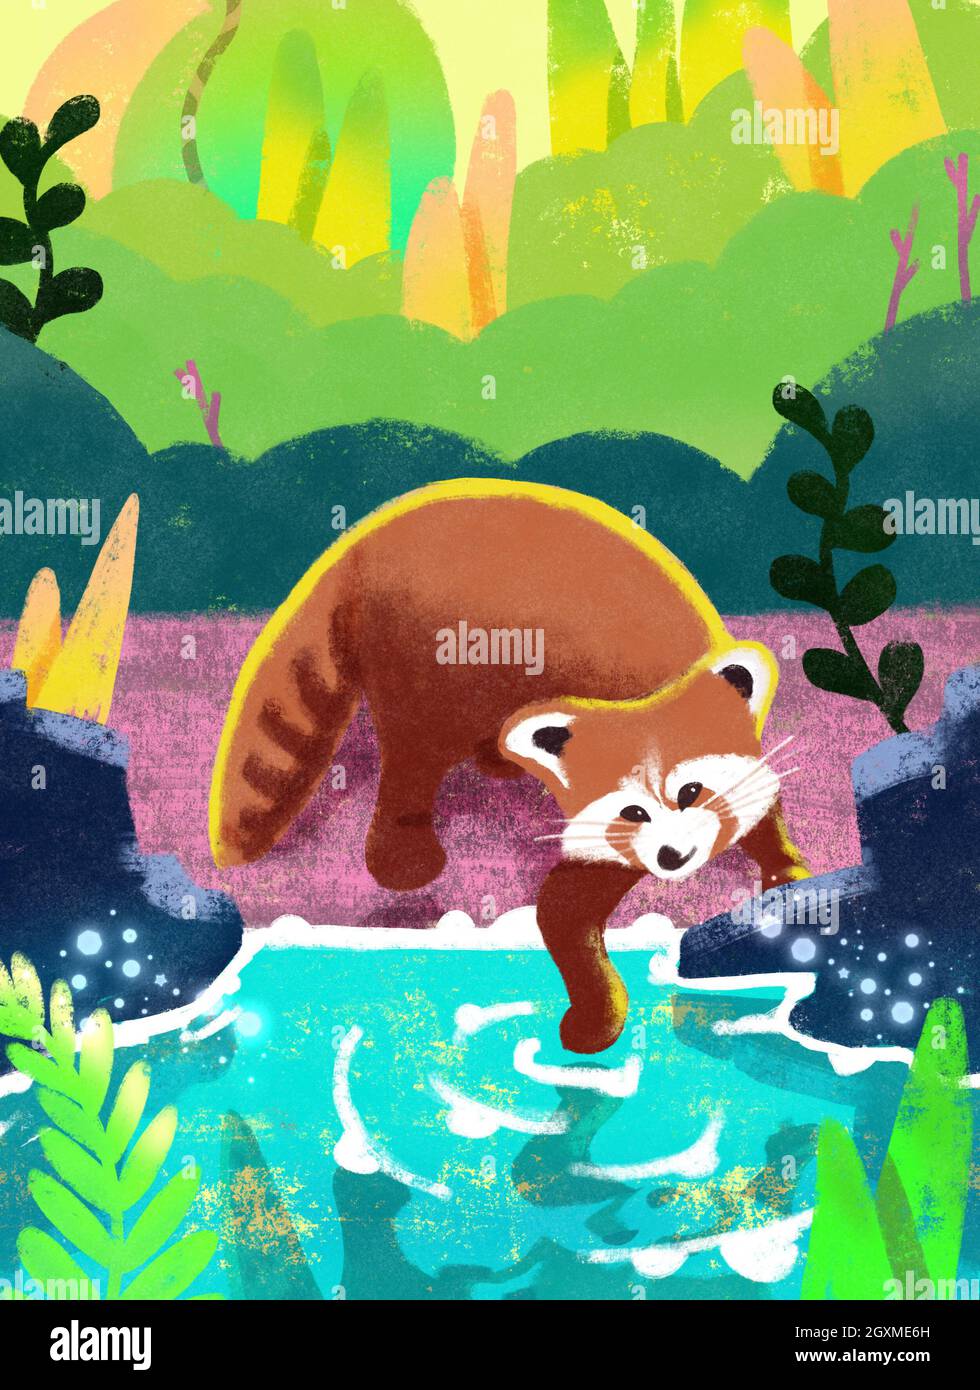 Red panda in jungle child illustration. Animal look at lake mirror touches the water with his paw. Fantasy art fairy landscape Stock Photo